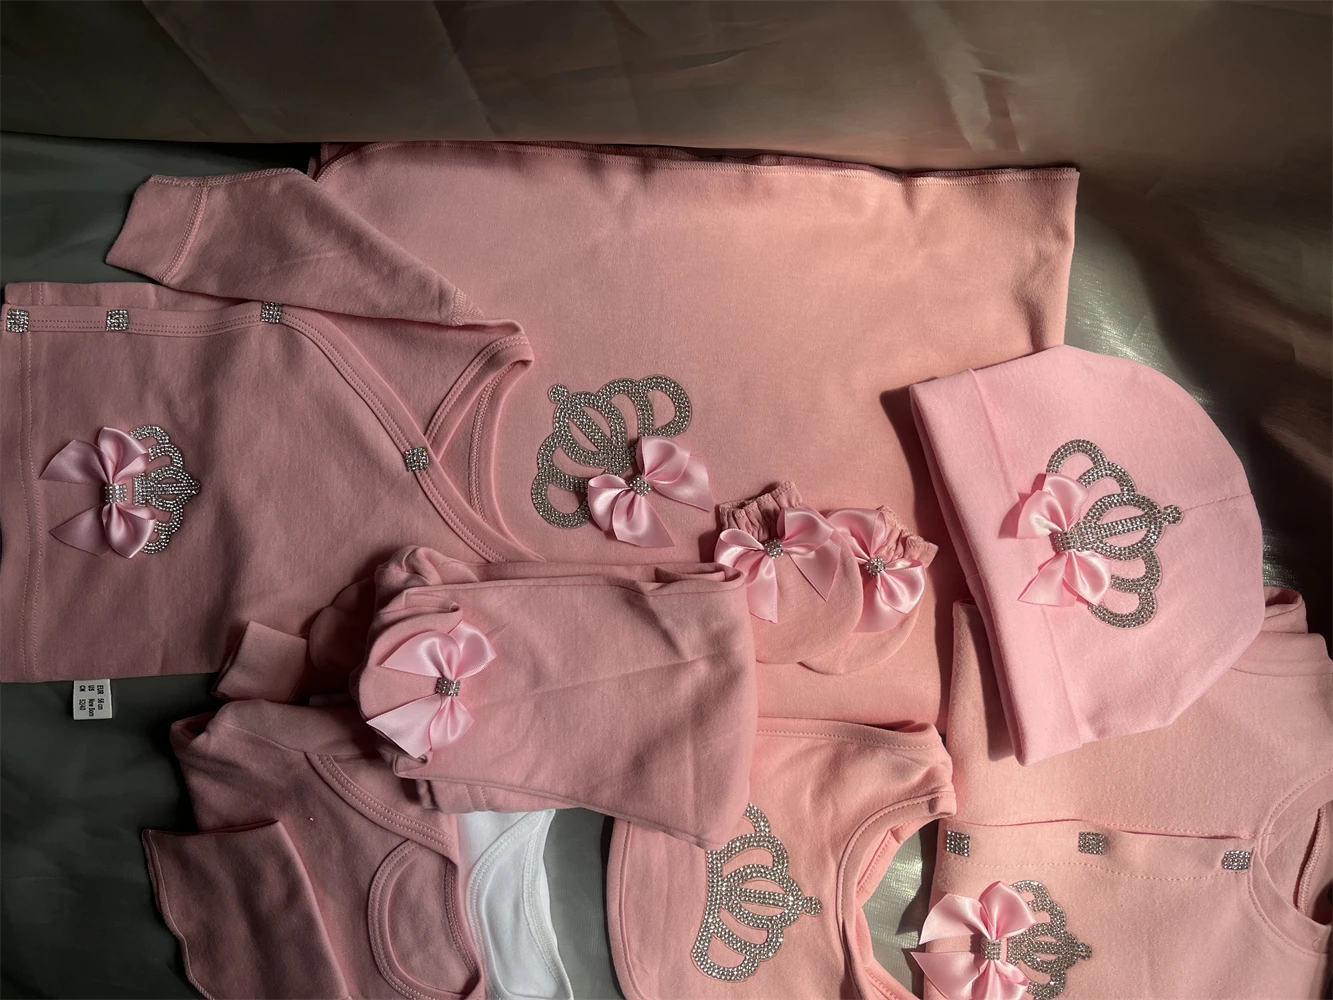 

10pcs Newborn Baby Girl Outfits Luxury Infant Clothing 100% Cotton Welcome Home Crown Jewlery Gift Box Receiving Blanket Bedding